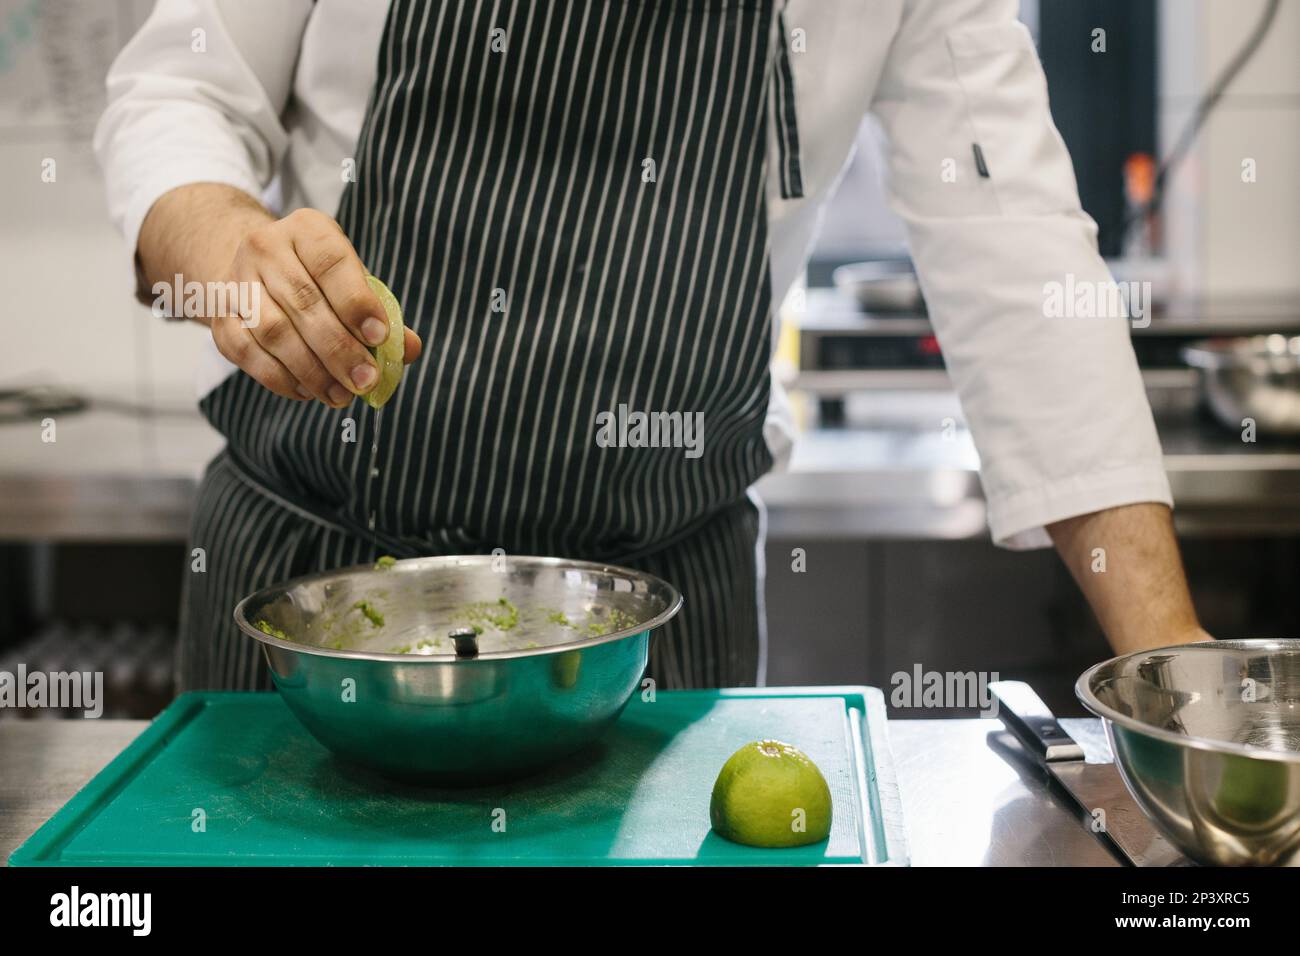 The chef is preparing food. Close-up of a male chef preparing avocado toast in a spacious modern kitchen. Stock Photo